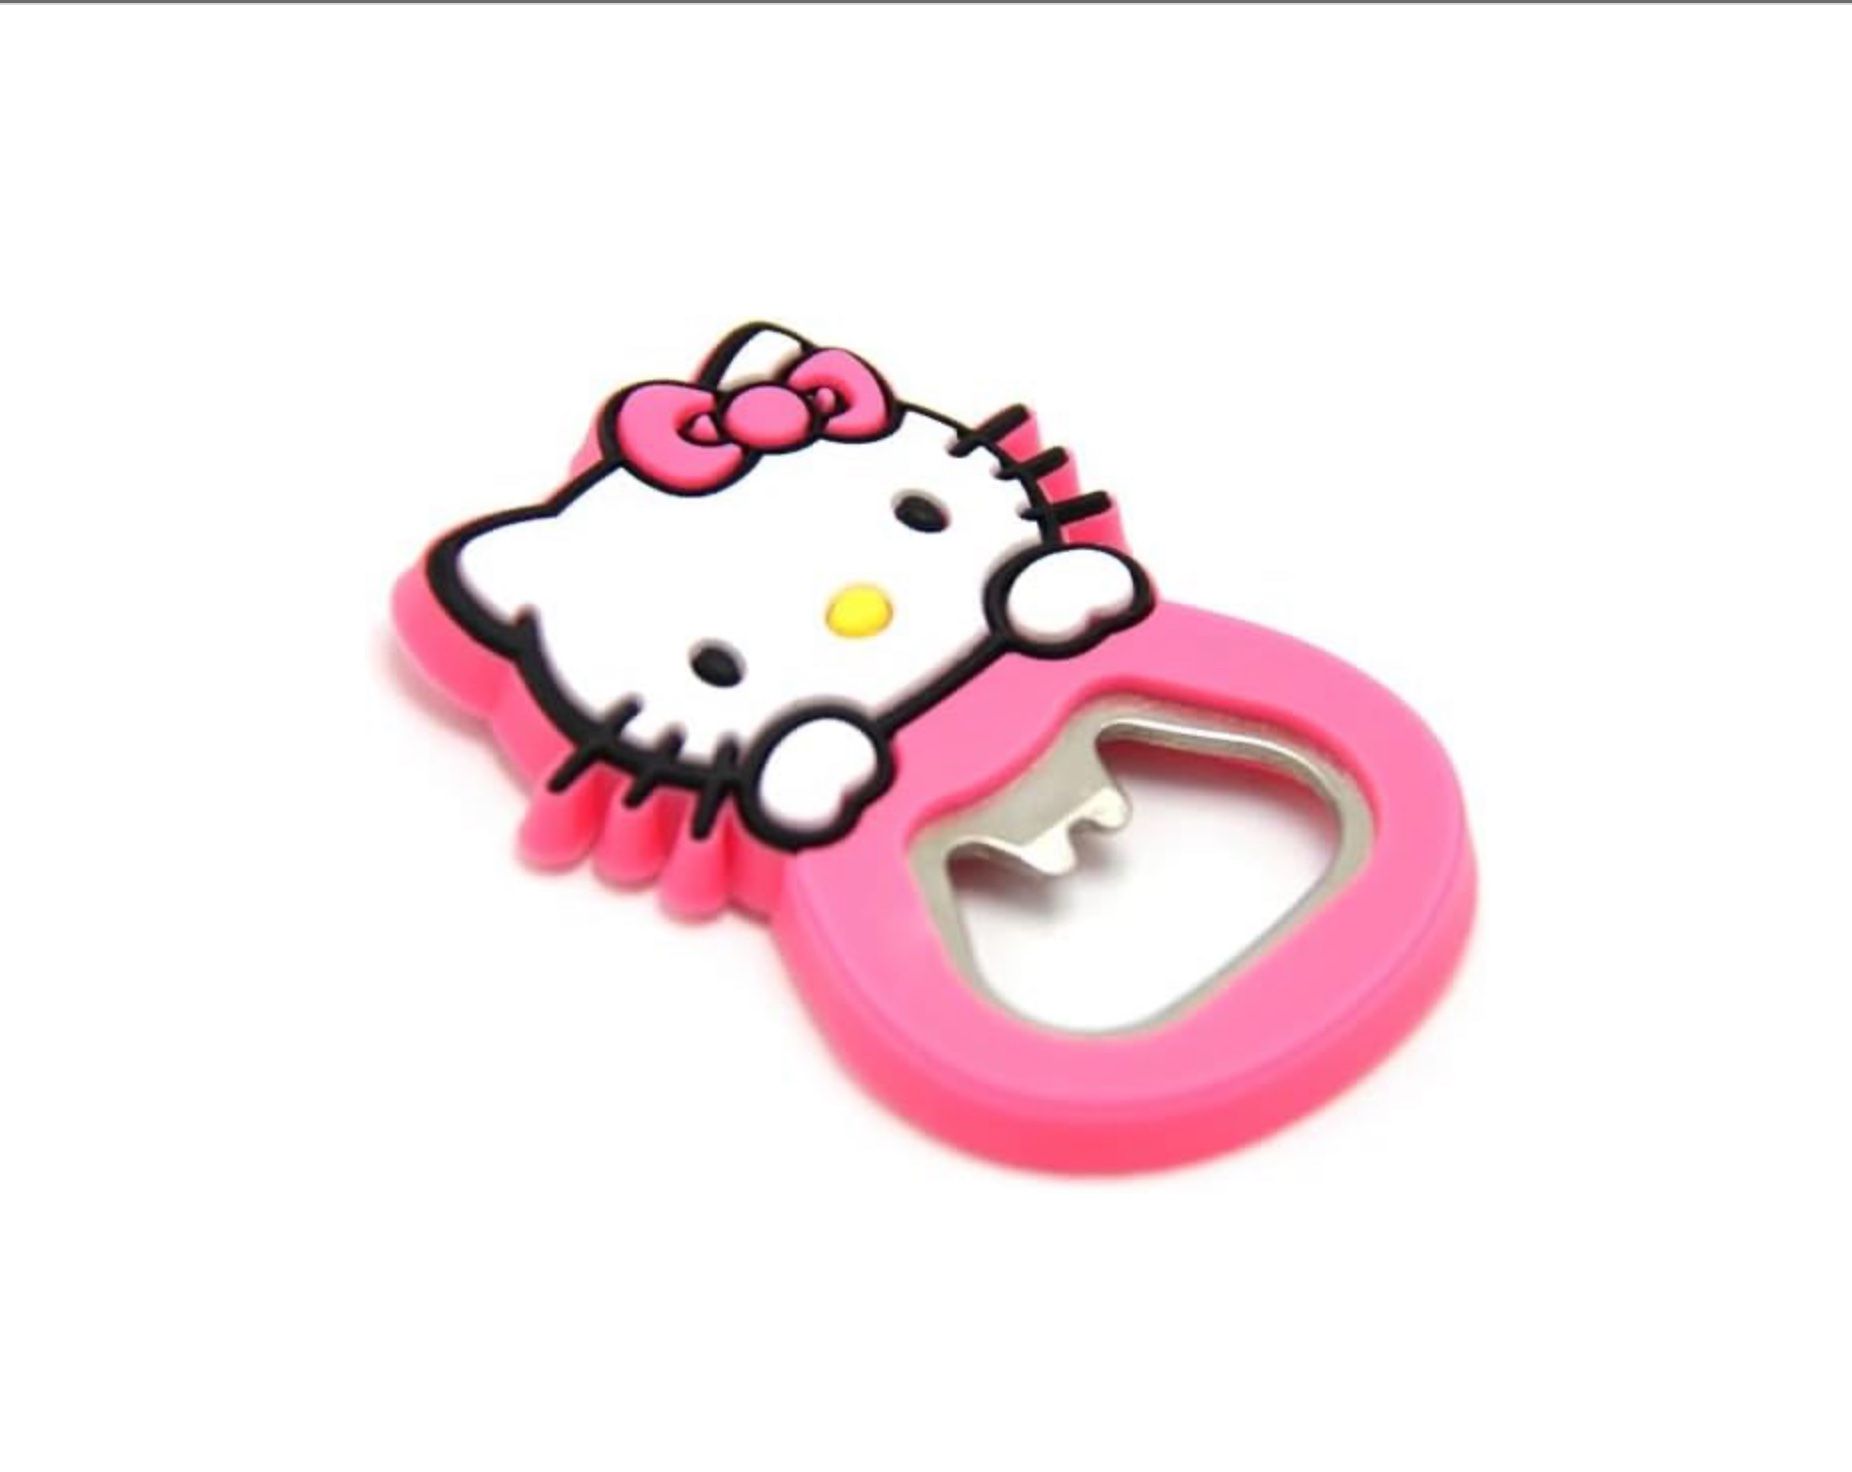 Opener with Fridge Magnet, One Key Opener, Creative shape, Decor Accesories, Gifts for any occasion Destapador, Abridor, Hello Kitty 